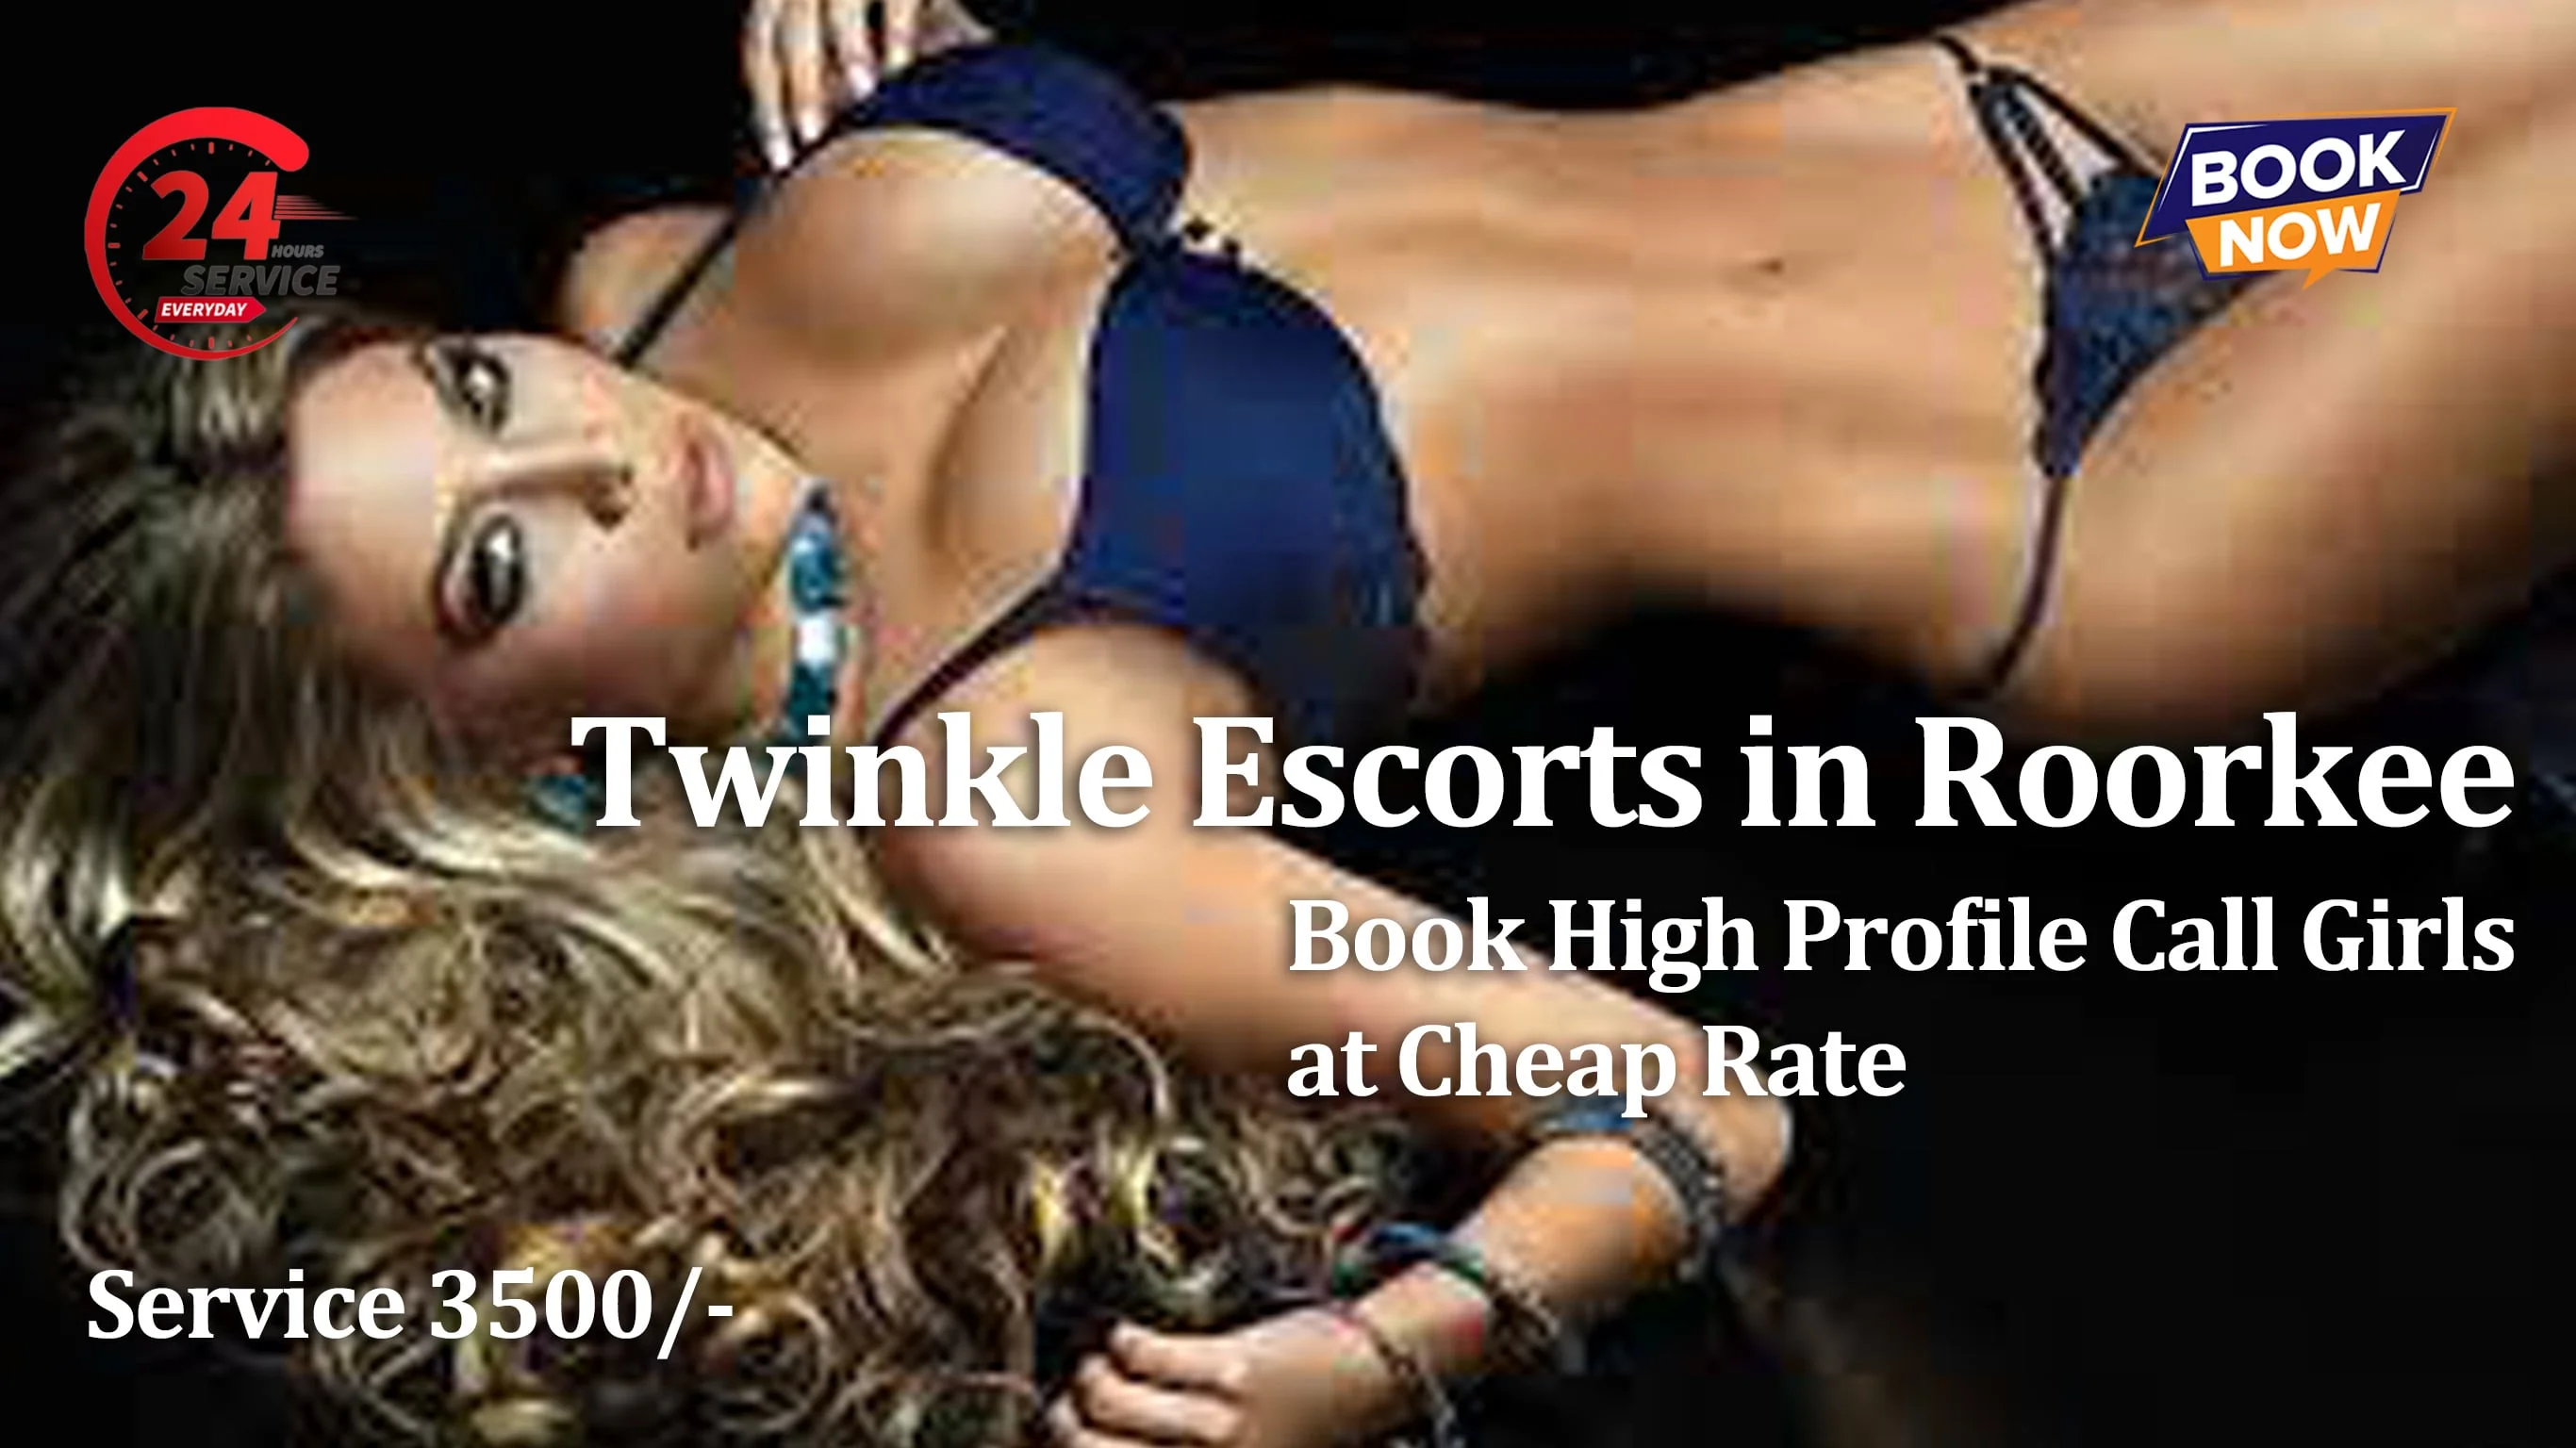 Roorkee Escort give description of twinkle escort service charges